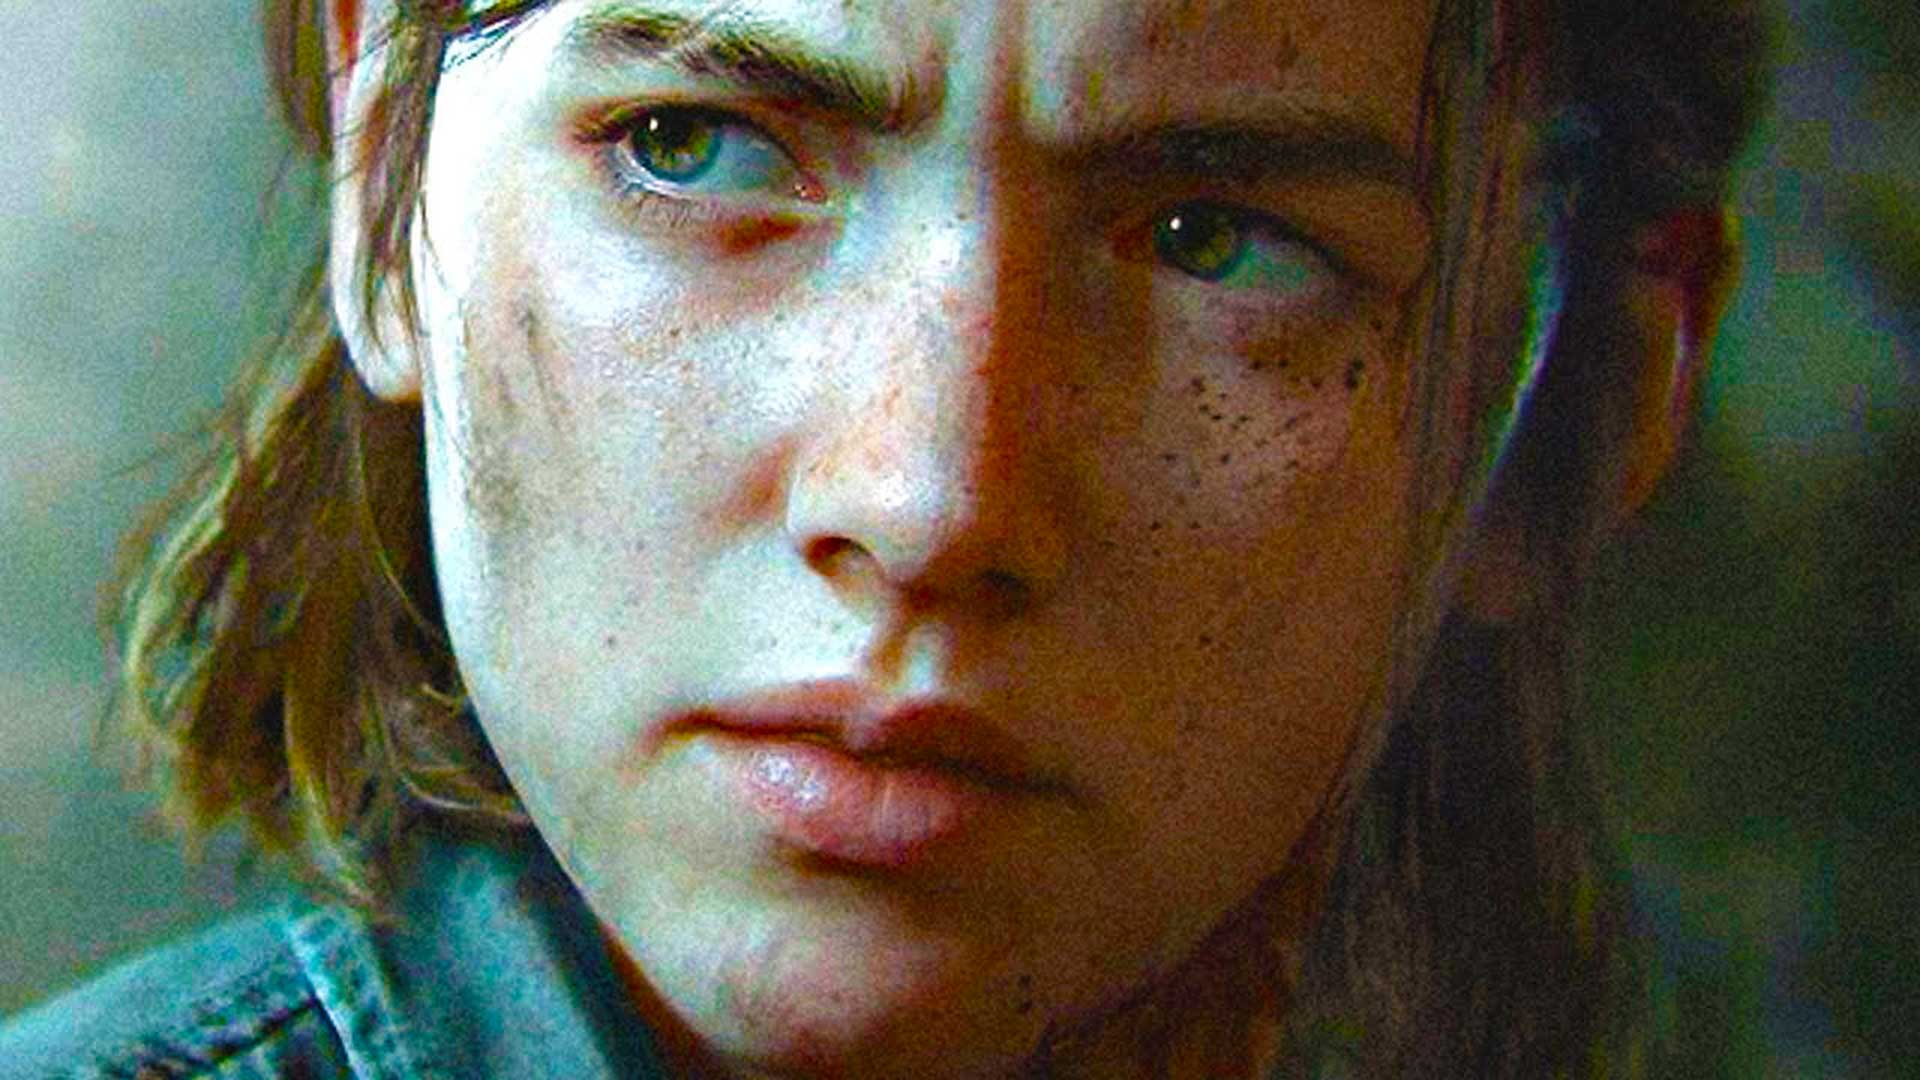 One The Last of Us Character Could Give Ellie the Ultimate Closure